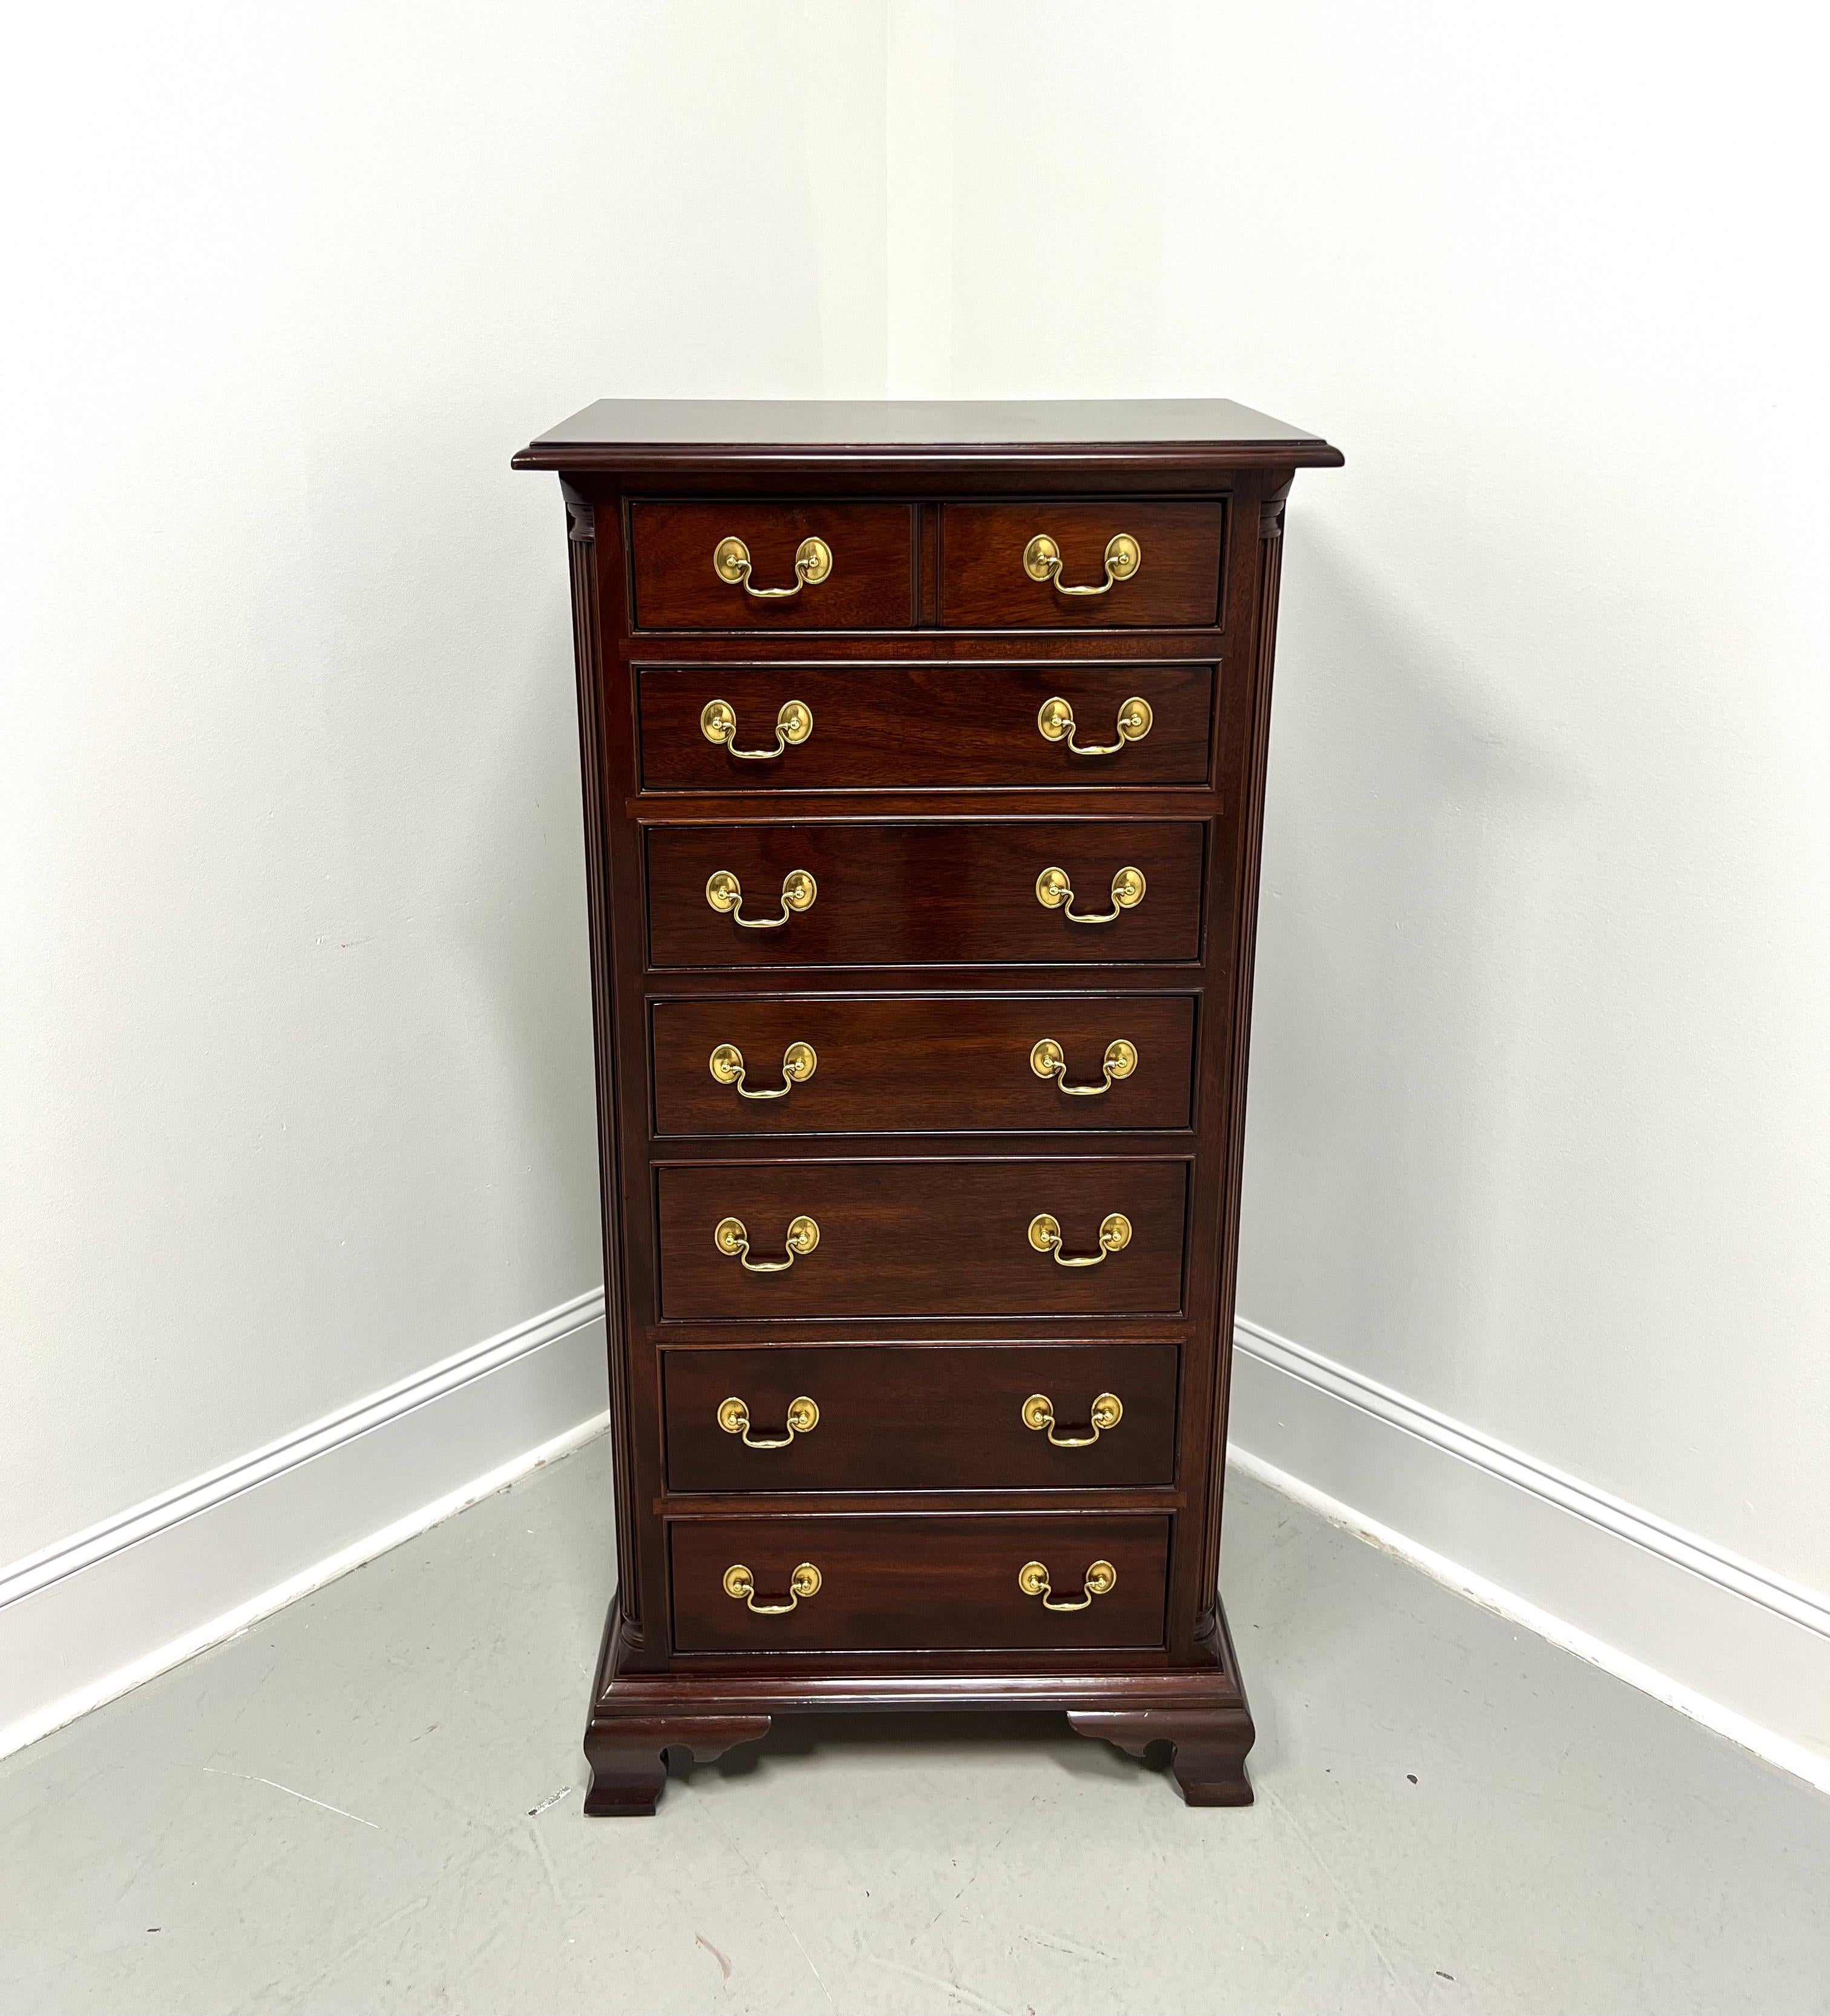 A Chippendale style semainier lingerie chest Stickley Furniture. Solid mahogany with brass hardware, bevel edge to top, fluted columns to front sides, and ogee bracket feet. Features seven drawers of dovetail construction, with top drawer having a